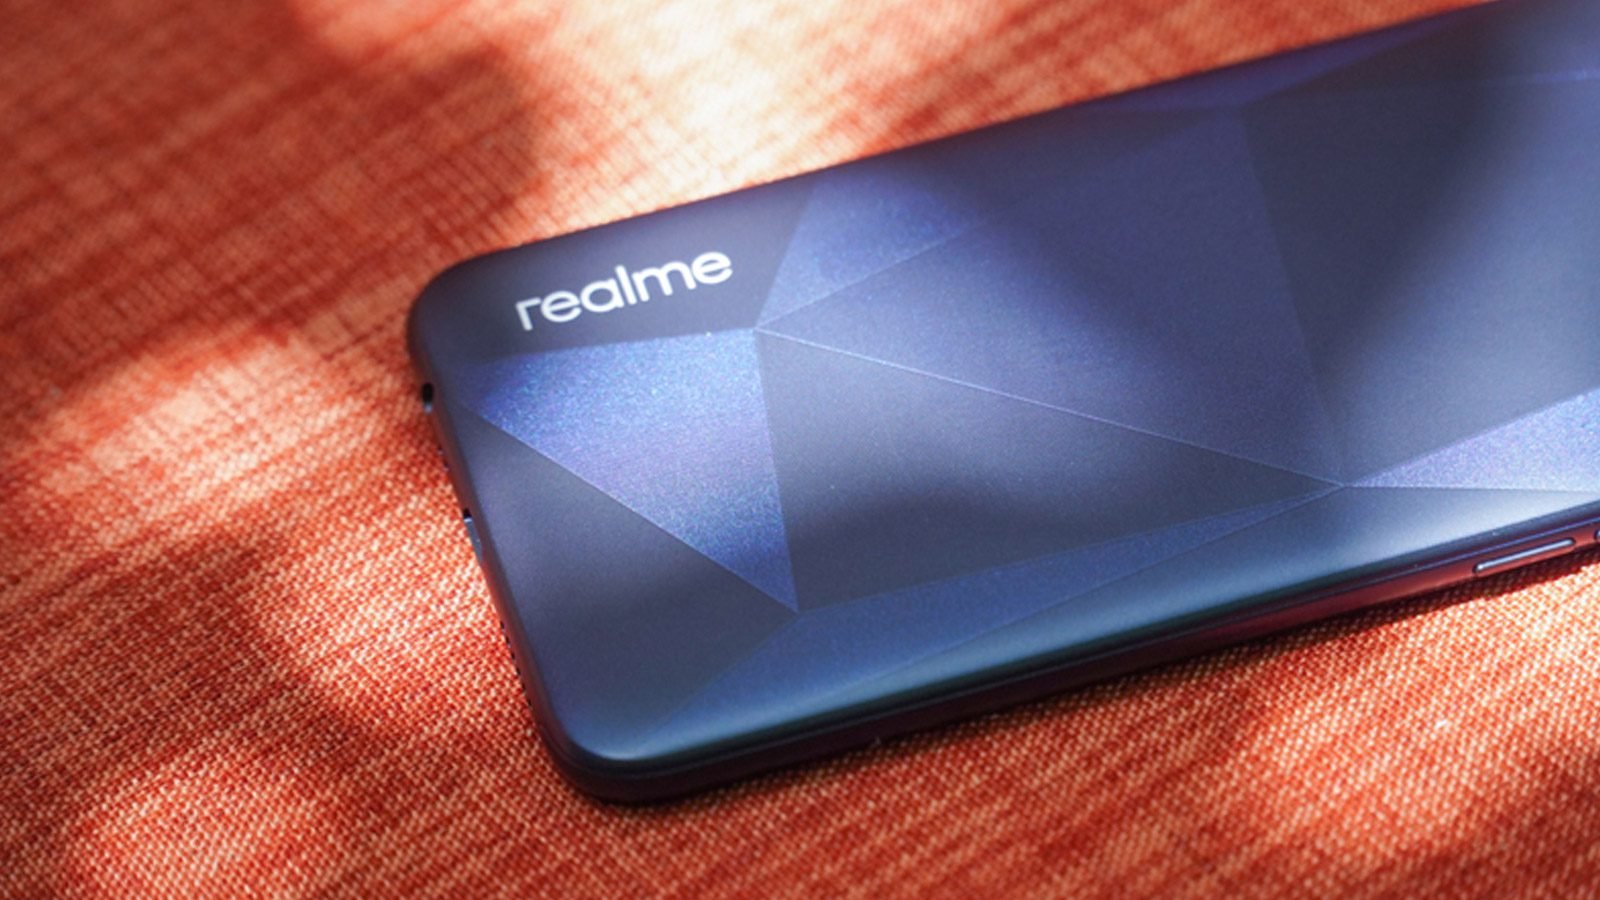 realme will bring the 5G smartphones under Rs 10K to India in 2022